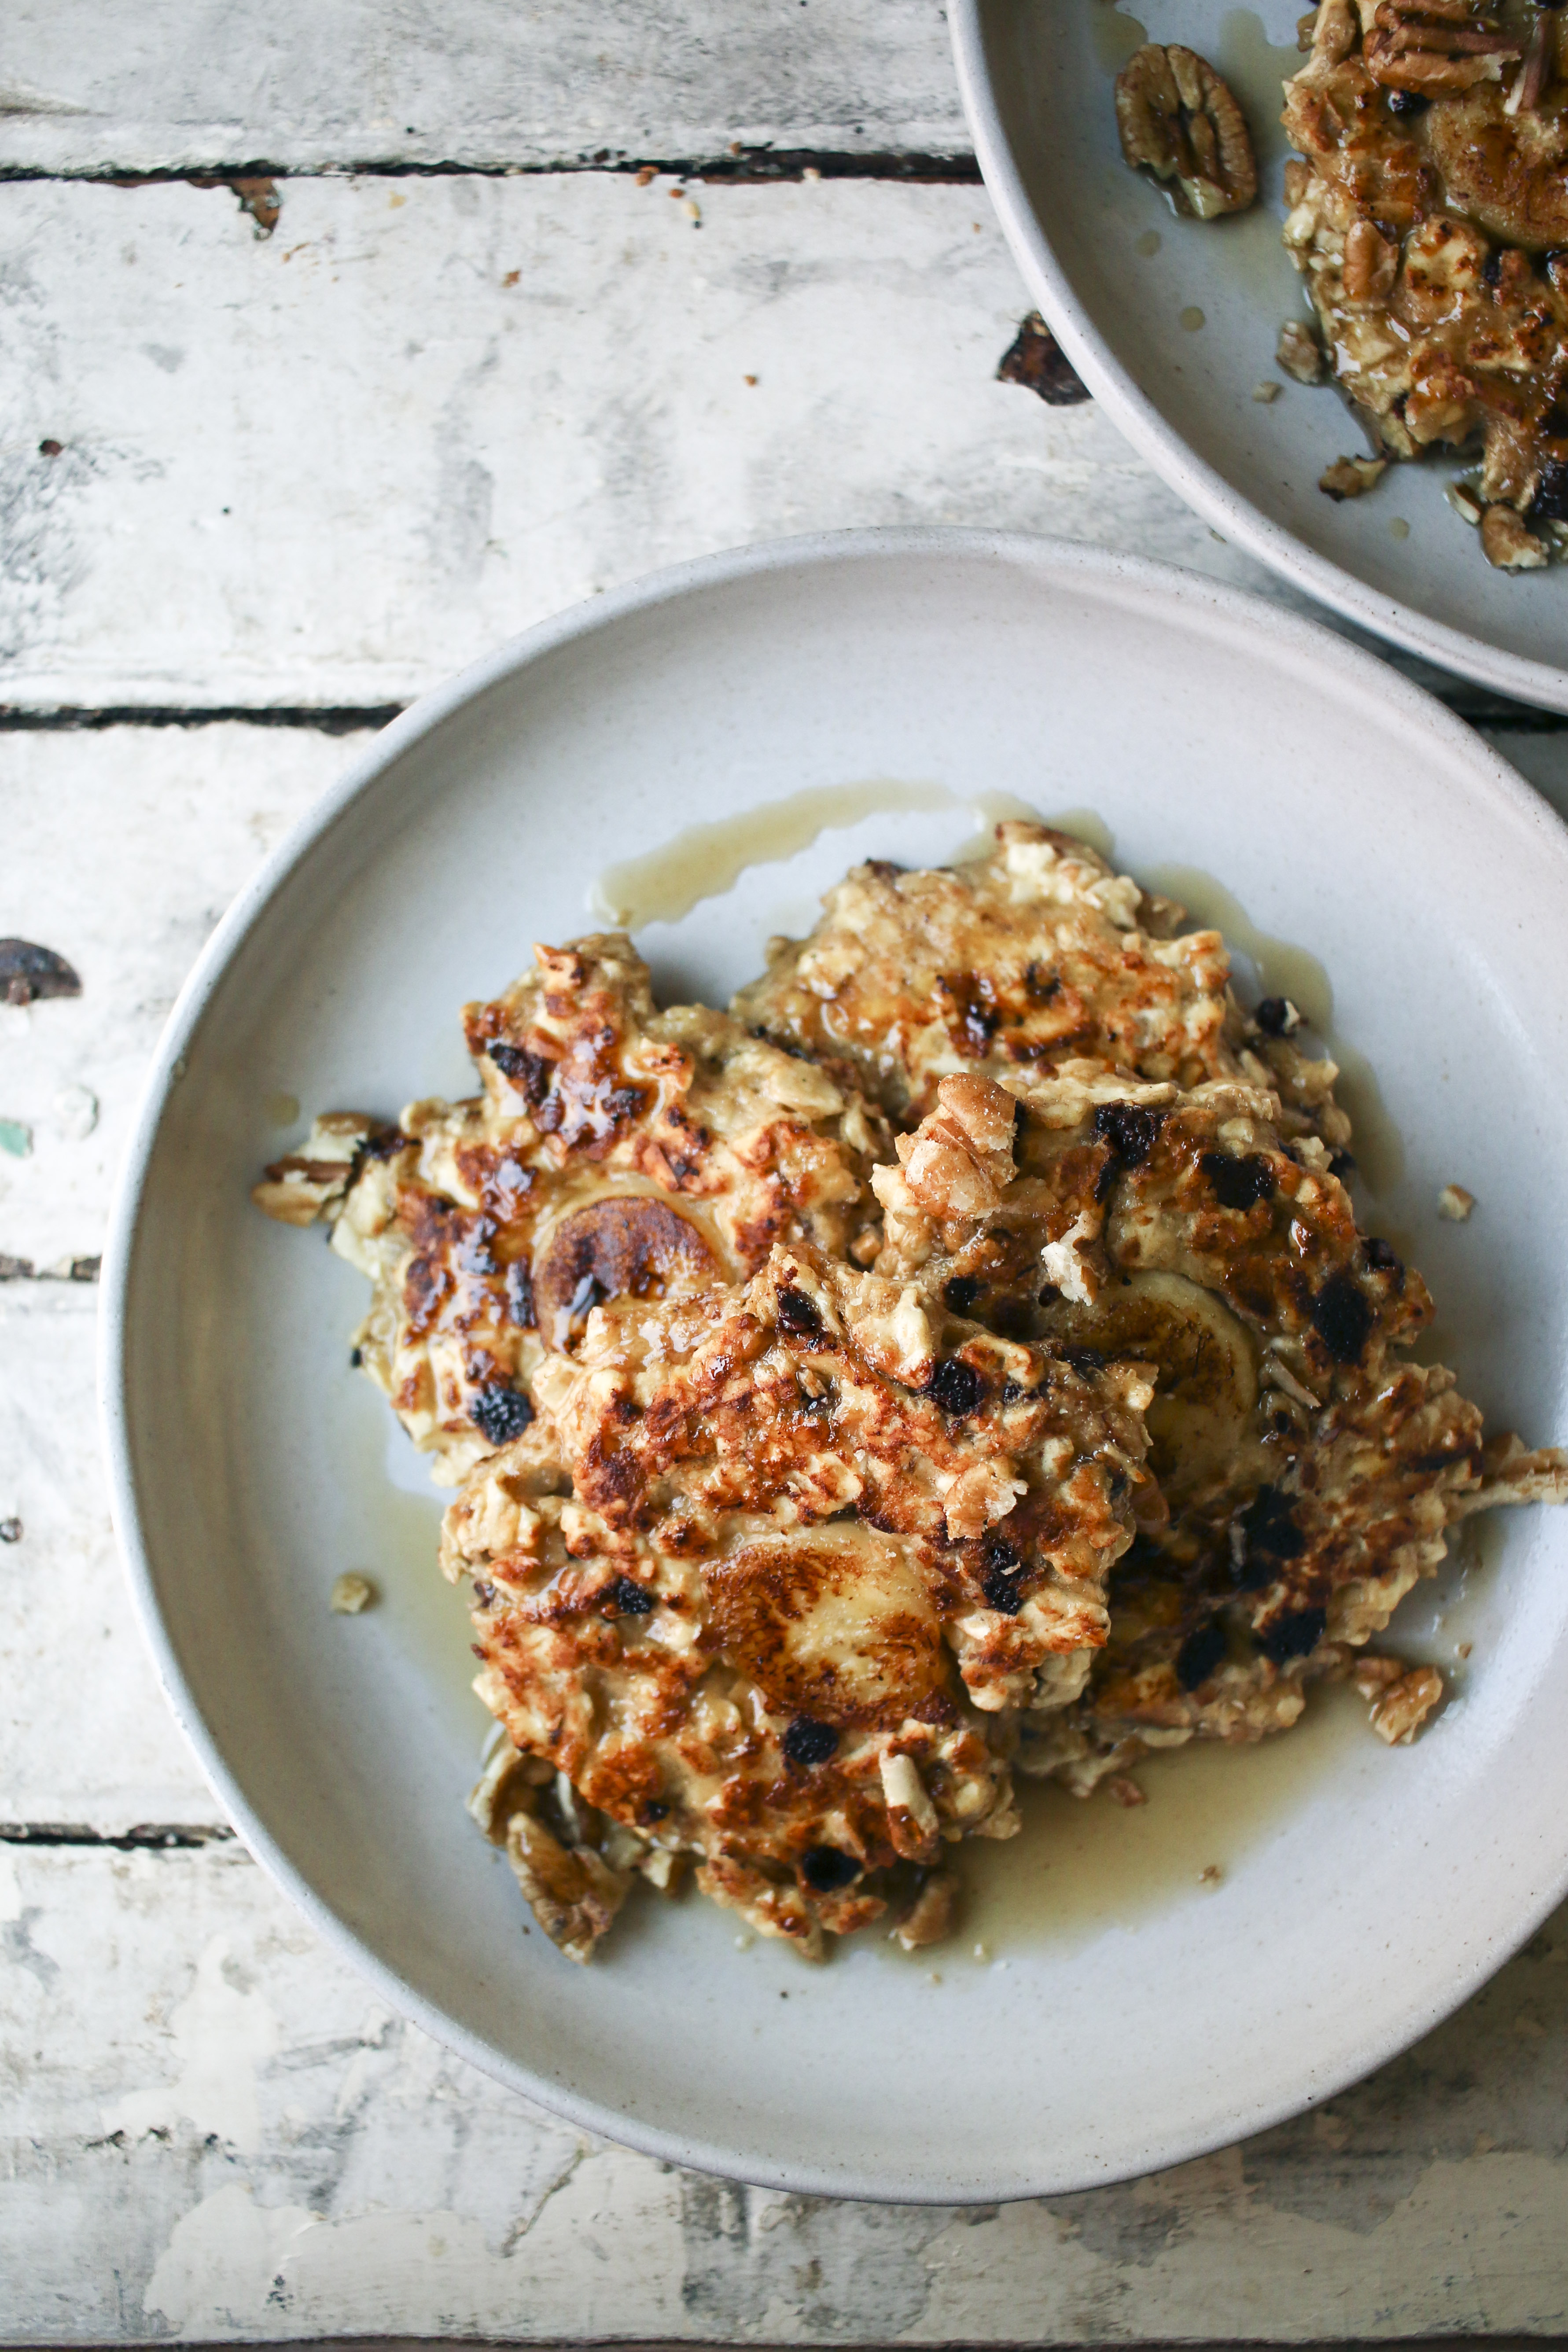 Pecan Banana Matzo Pancakes with Chocolate Chips | Got leftover matzo? | I Will Not Eat Oysters